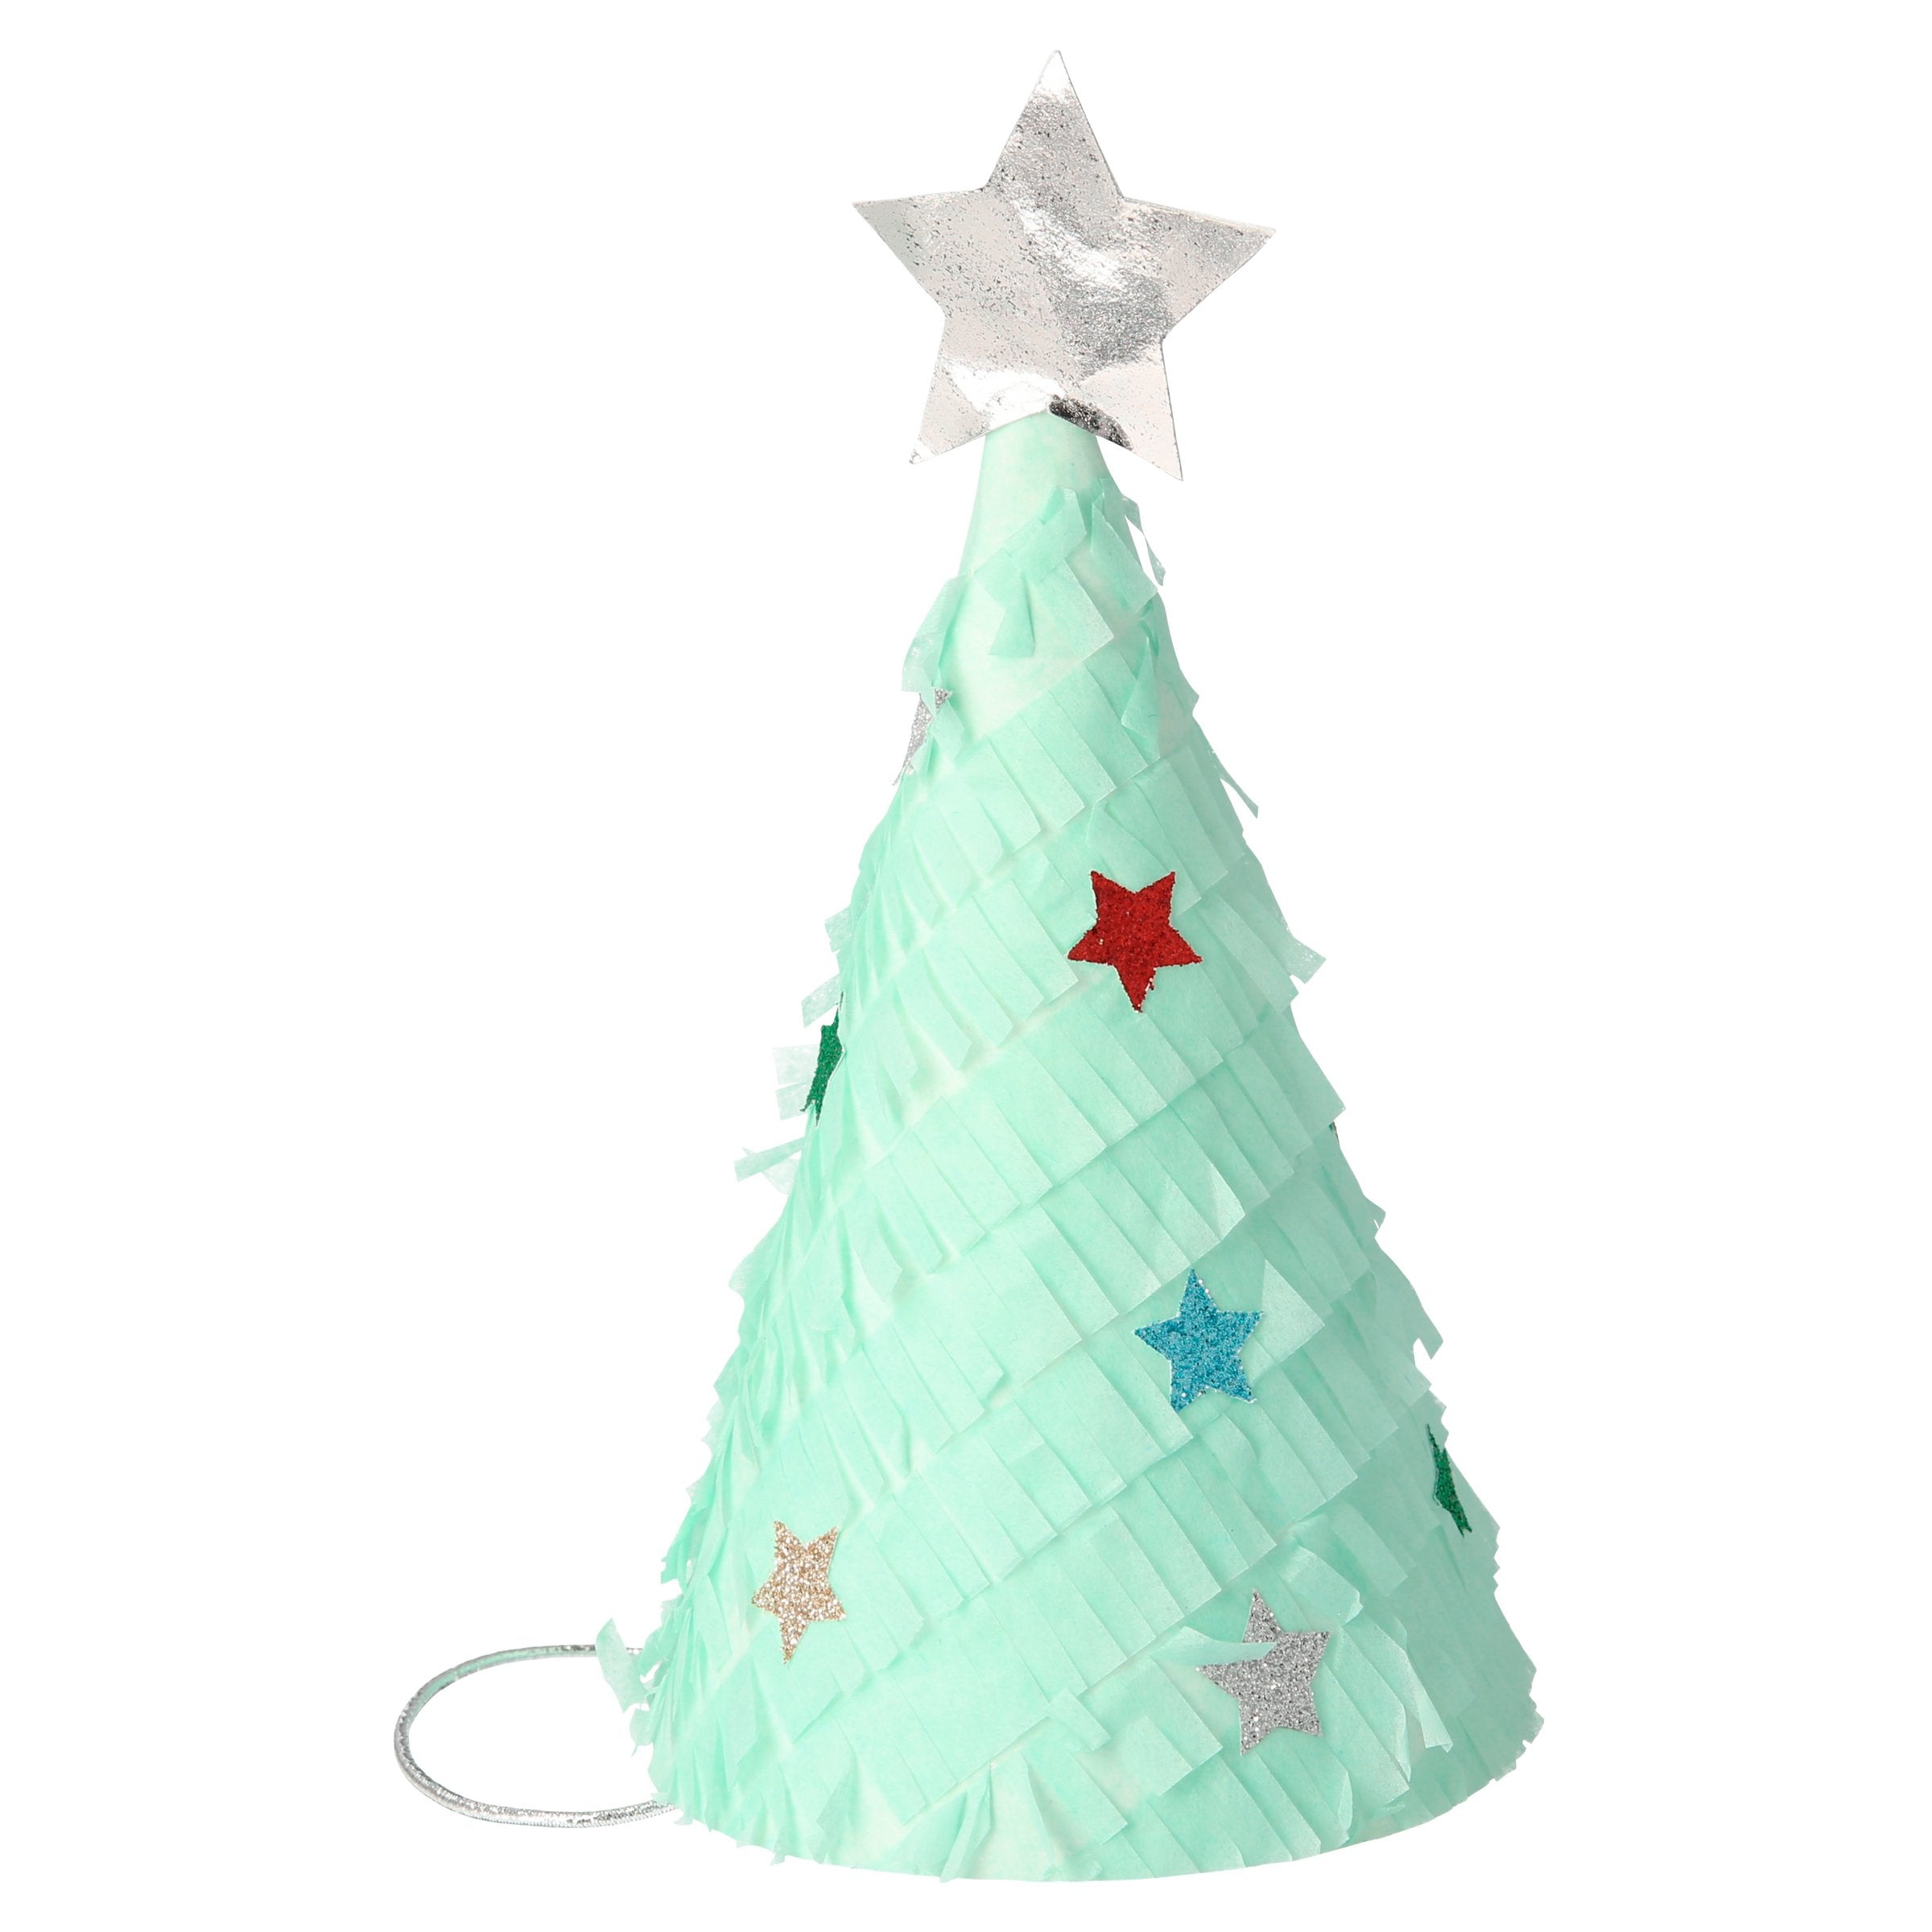 Our fun Christmas party hats look like Christmas trees covered in stars.